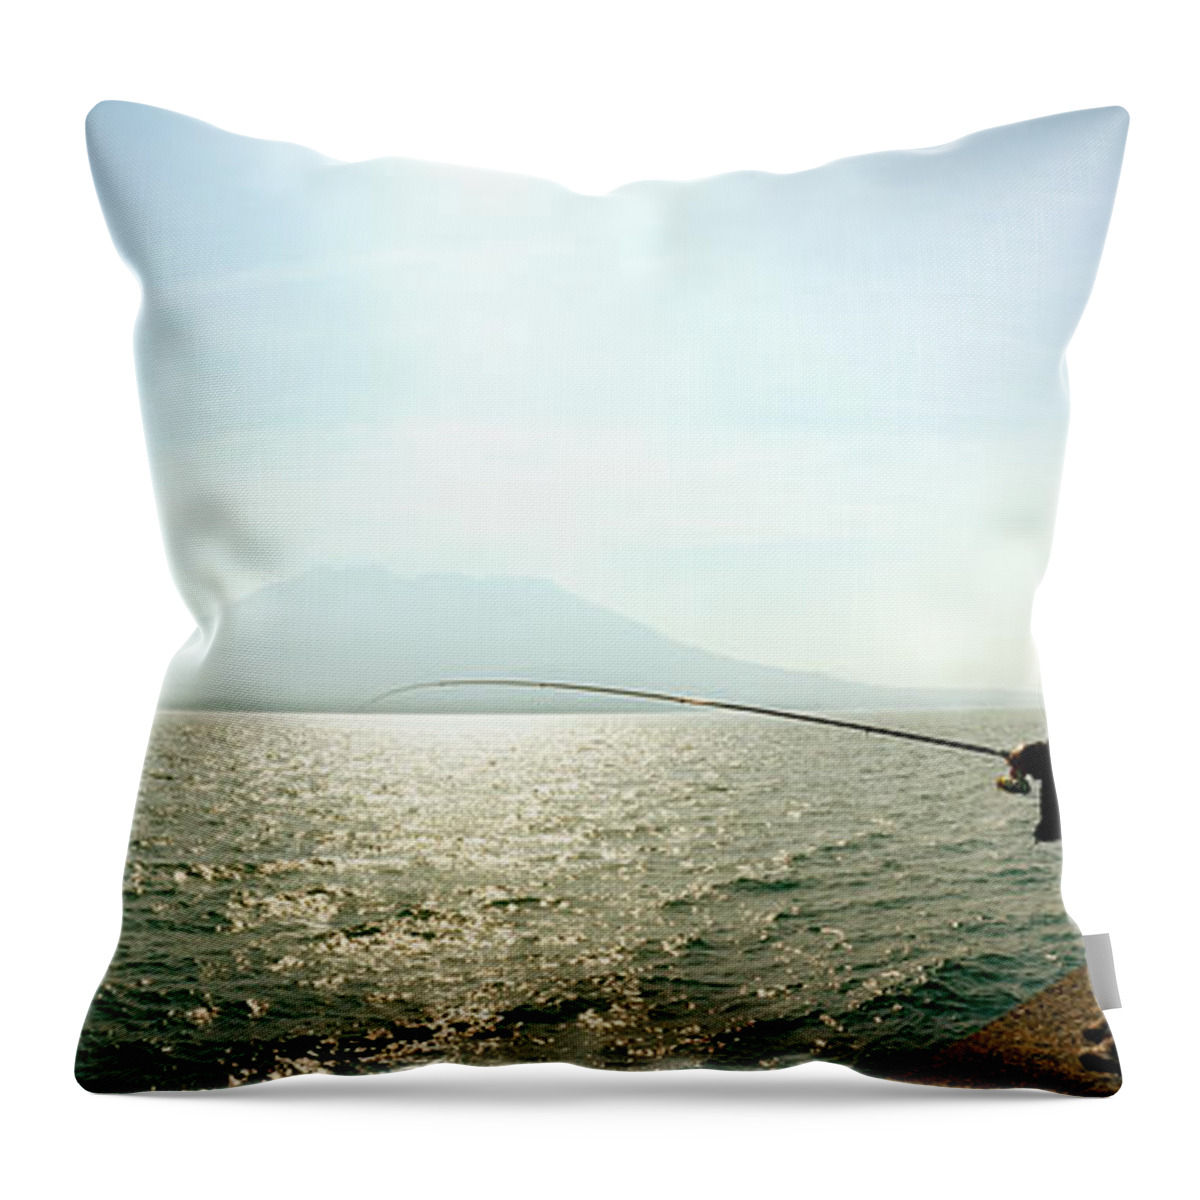 Photography Throw Pillow featuring the photograph Men Fishing In Sakurajima Island by Panoramic Images